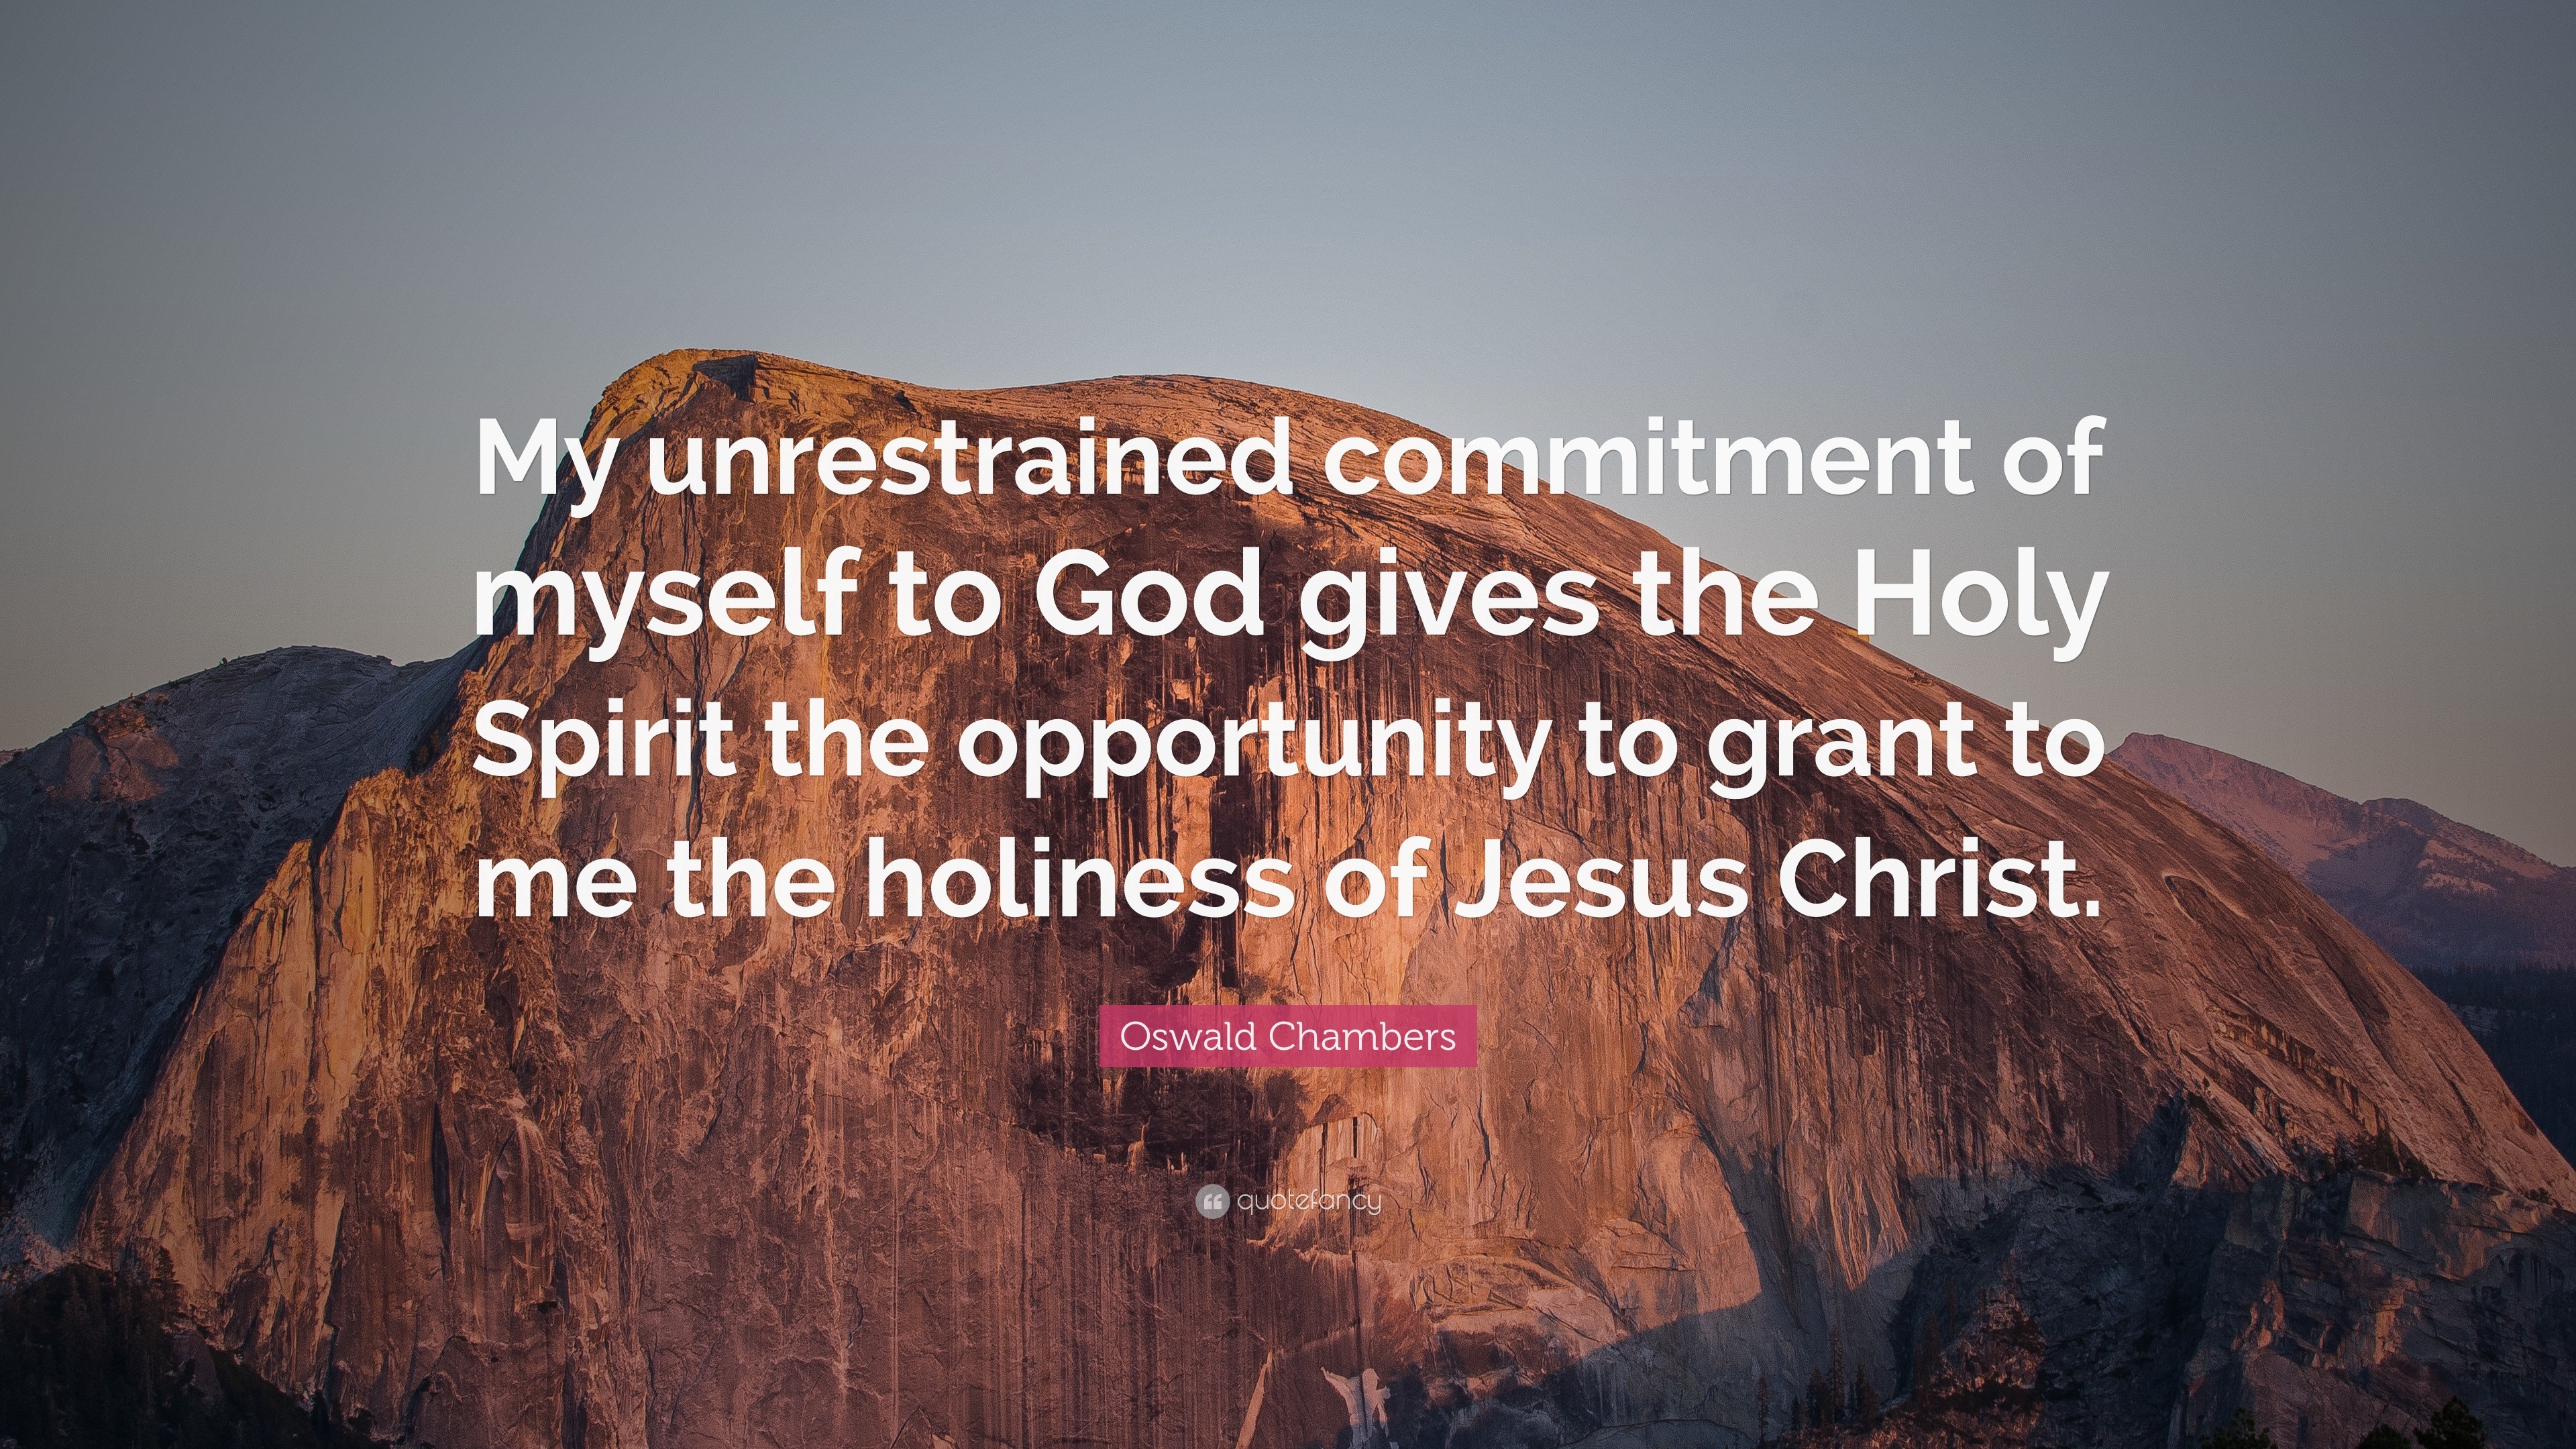 Oswald Chambers Quote: “My unrestrained commitment of myself to God